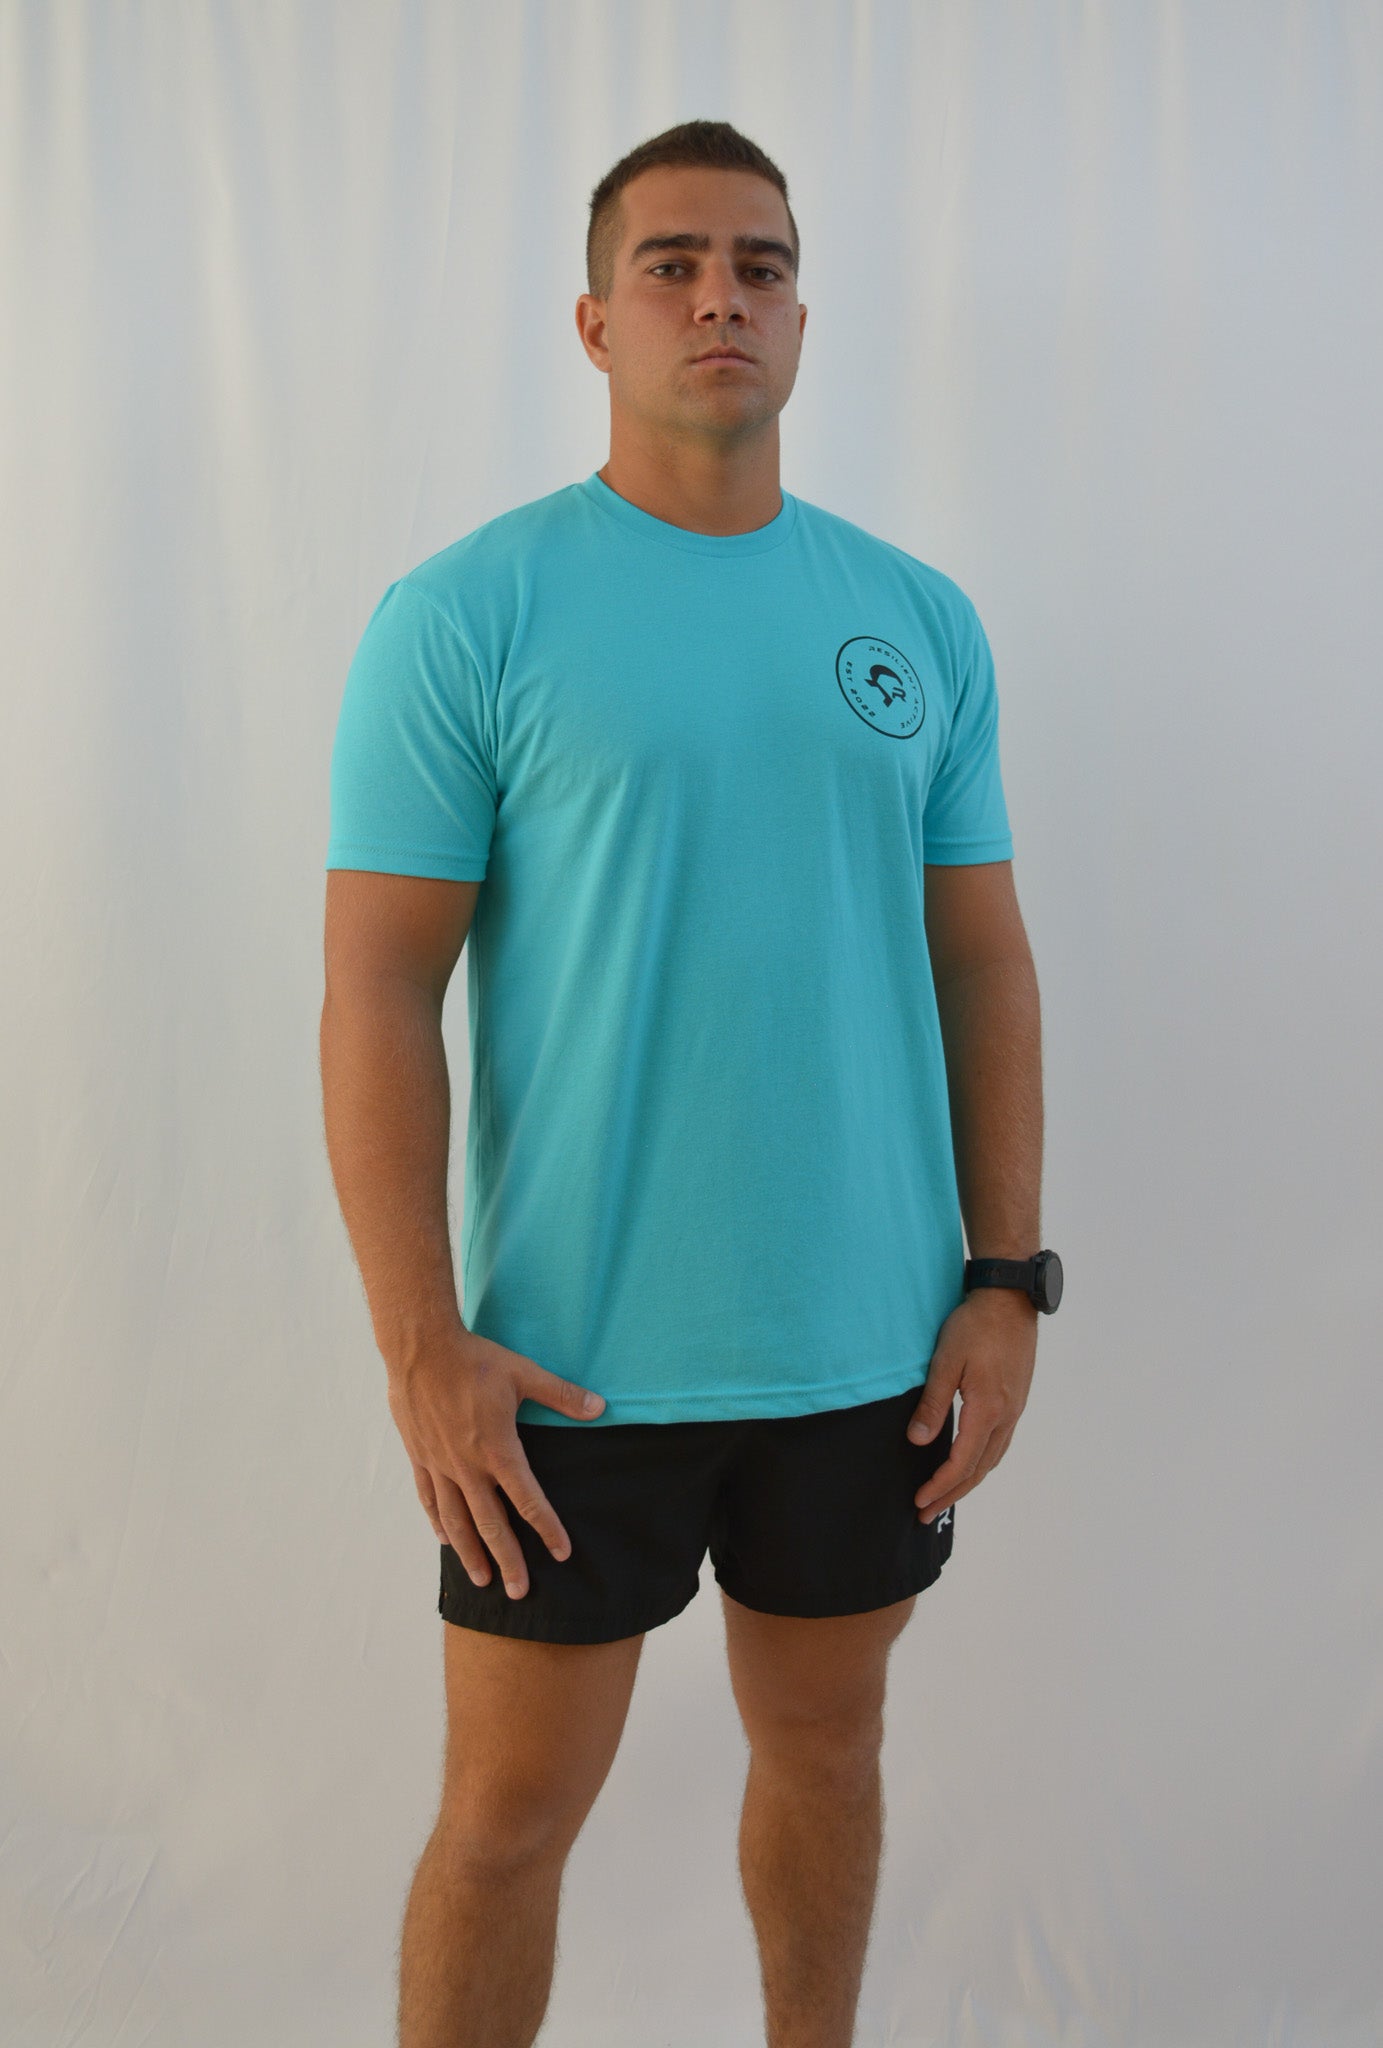 RESILIENT Comfort Style Shirt- Sky Blue - Resilient Active